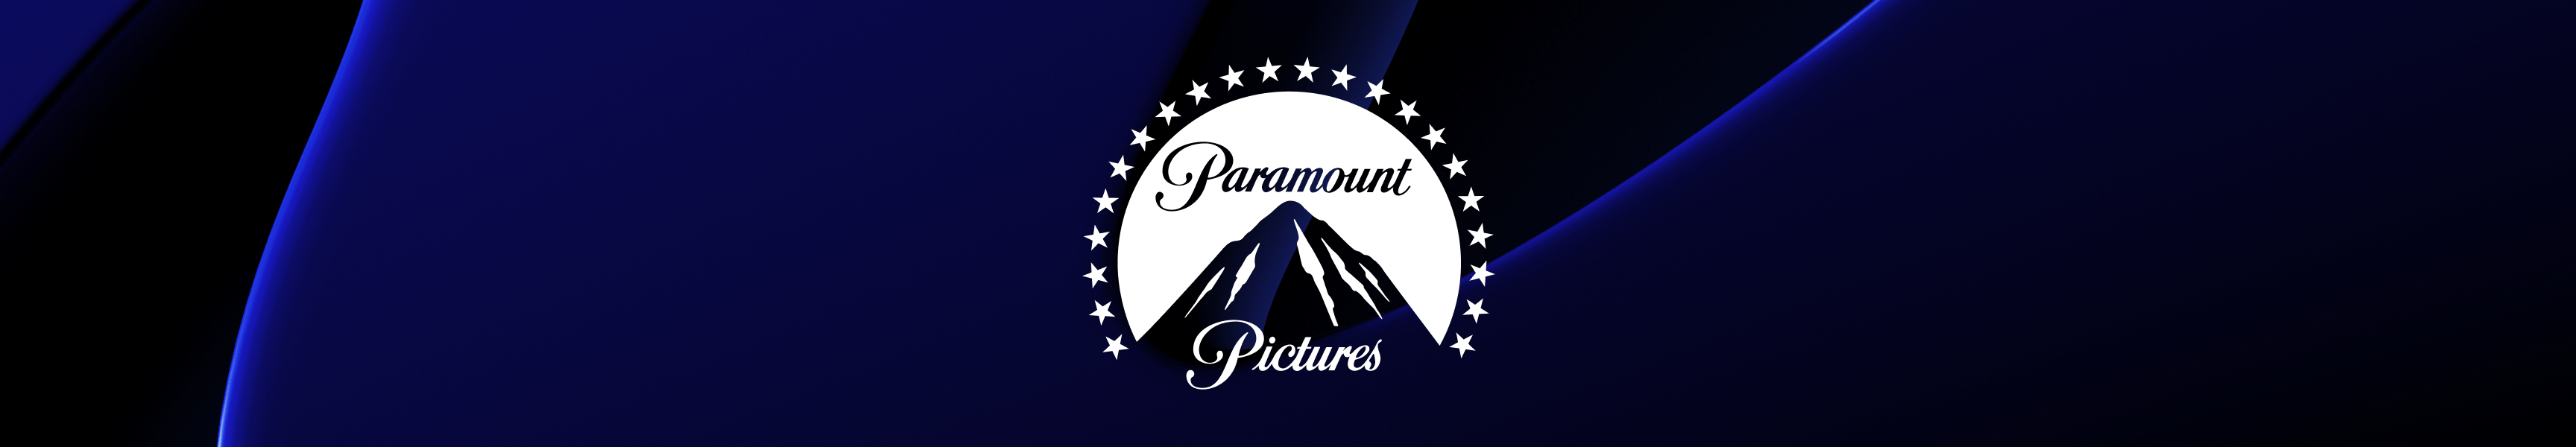 Paramount Pictures Drinkware